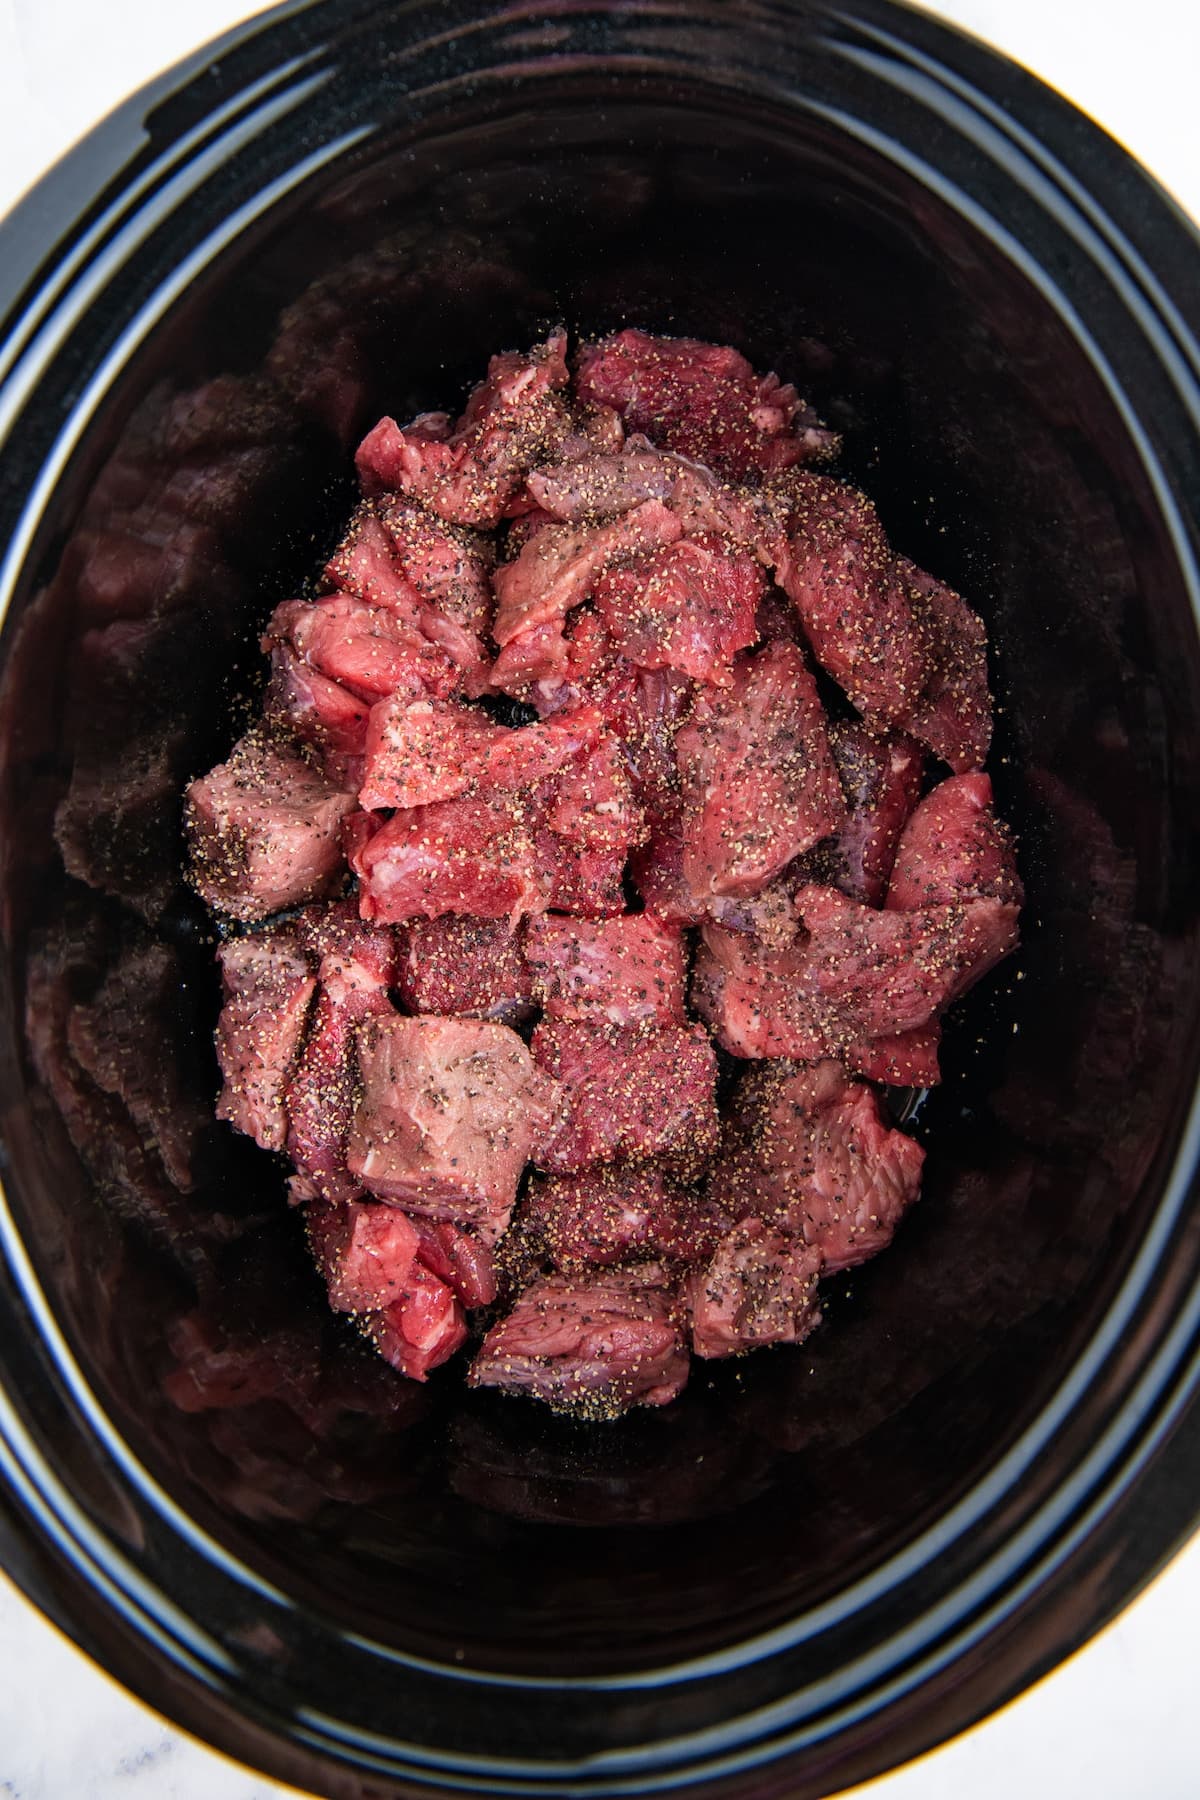 Cut up beef in a crockpot with salt and pepper on top.